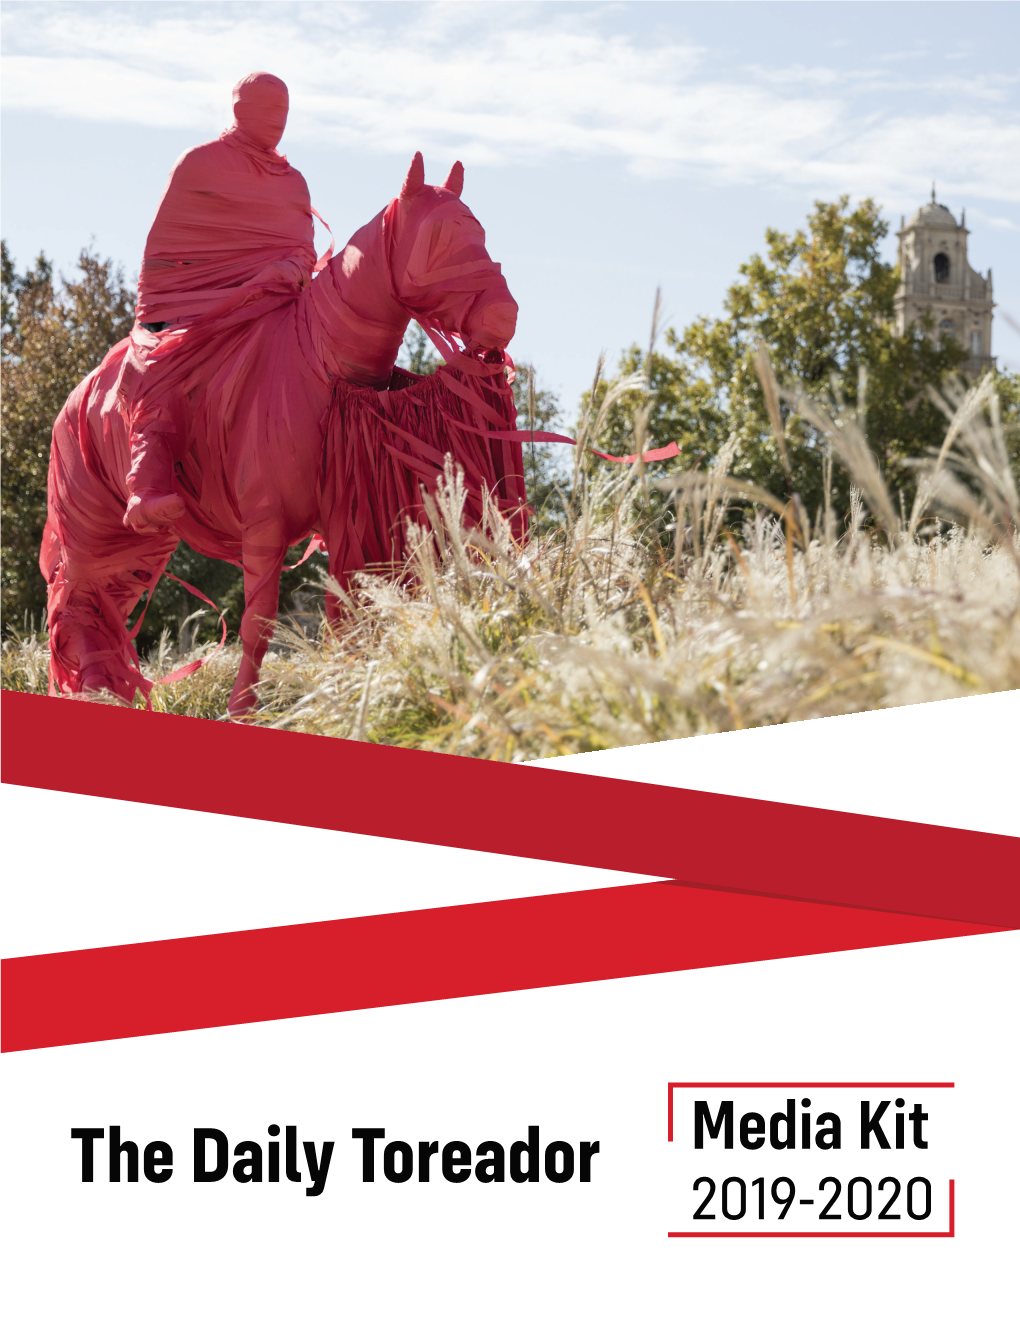 The Daily Toreador Media Kit 2019-2020 WHAT IS the DAILY TOREADOR?